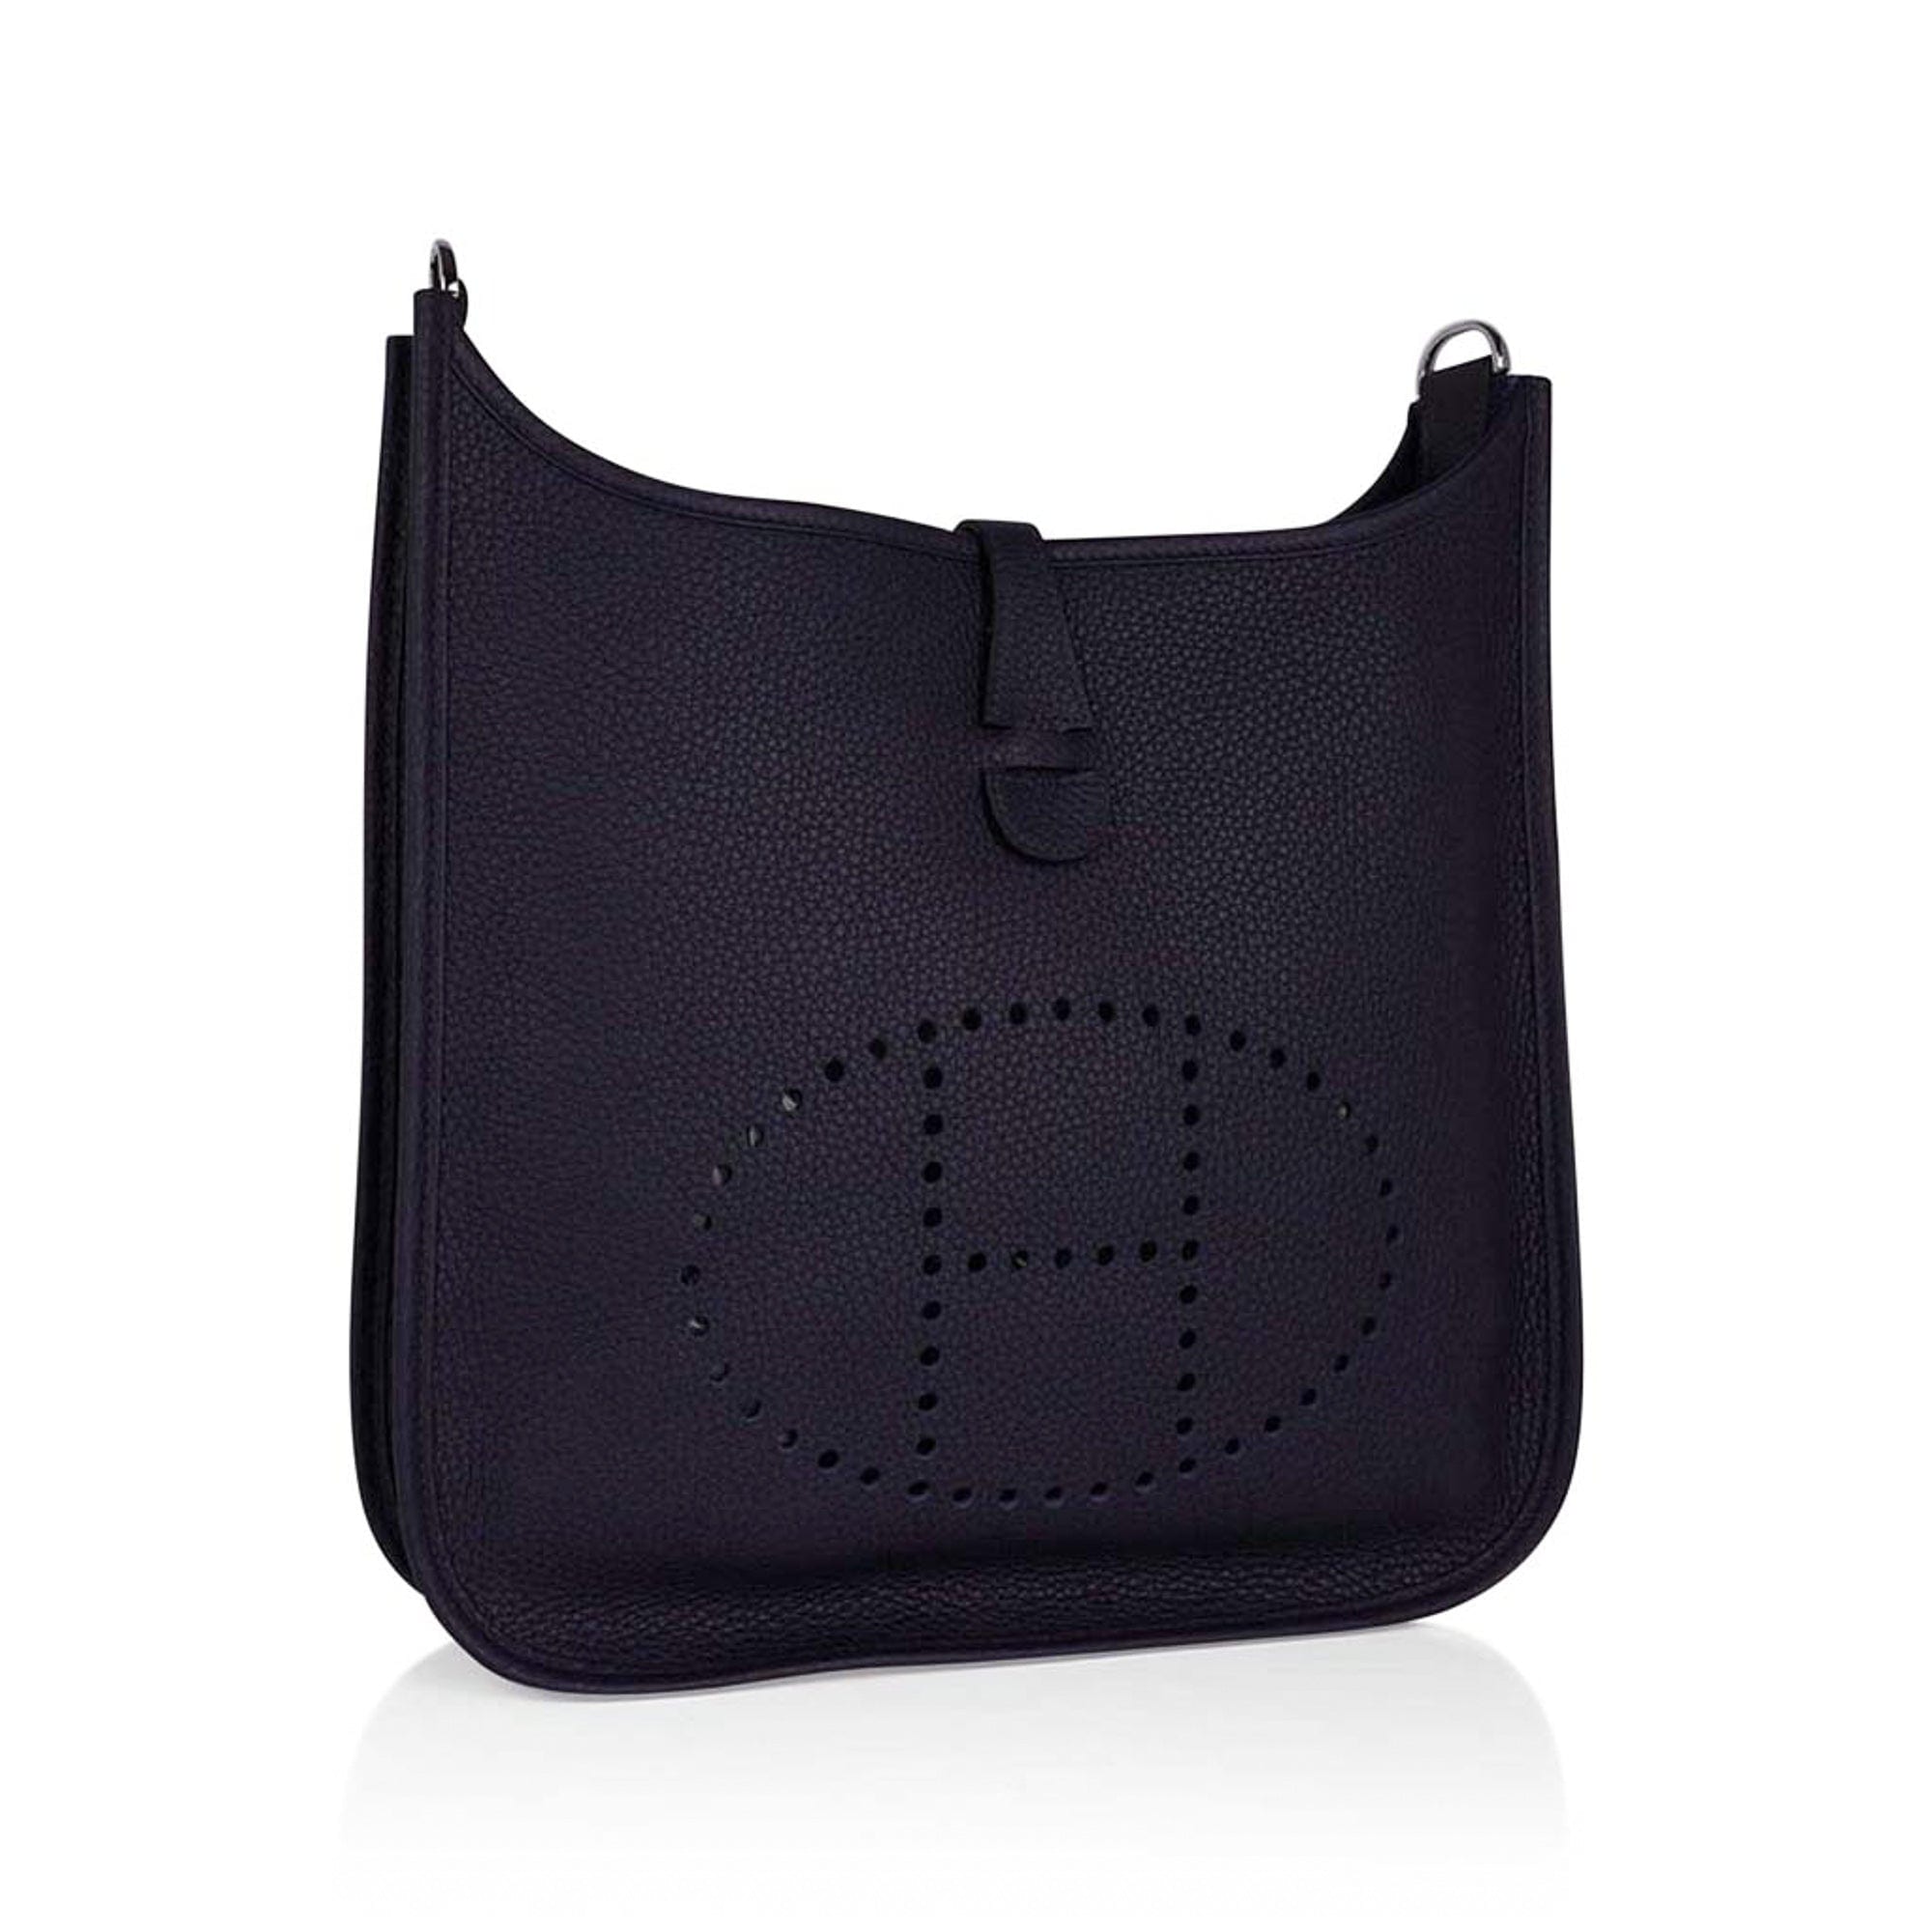 Hermes Evelyne III PM Clemence Bag in Black with Palladium Hardware